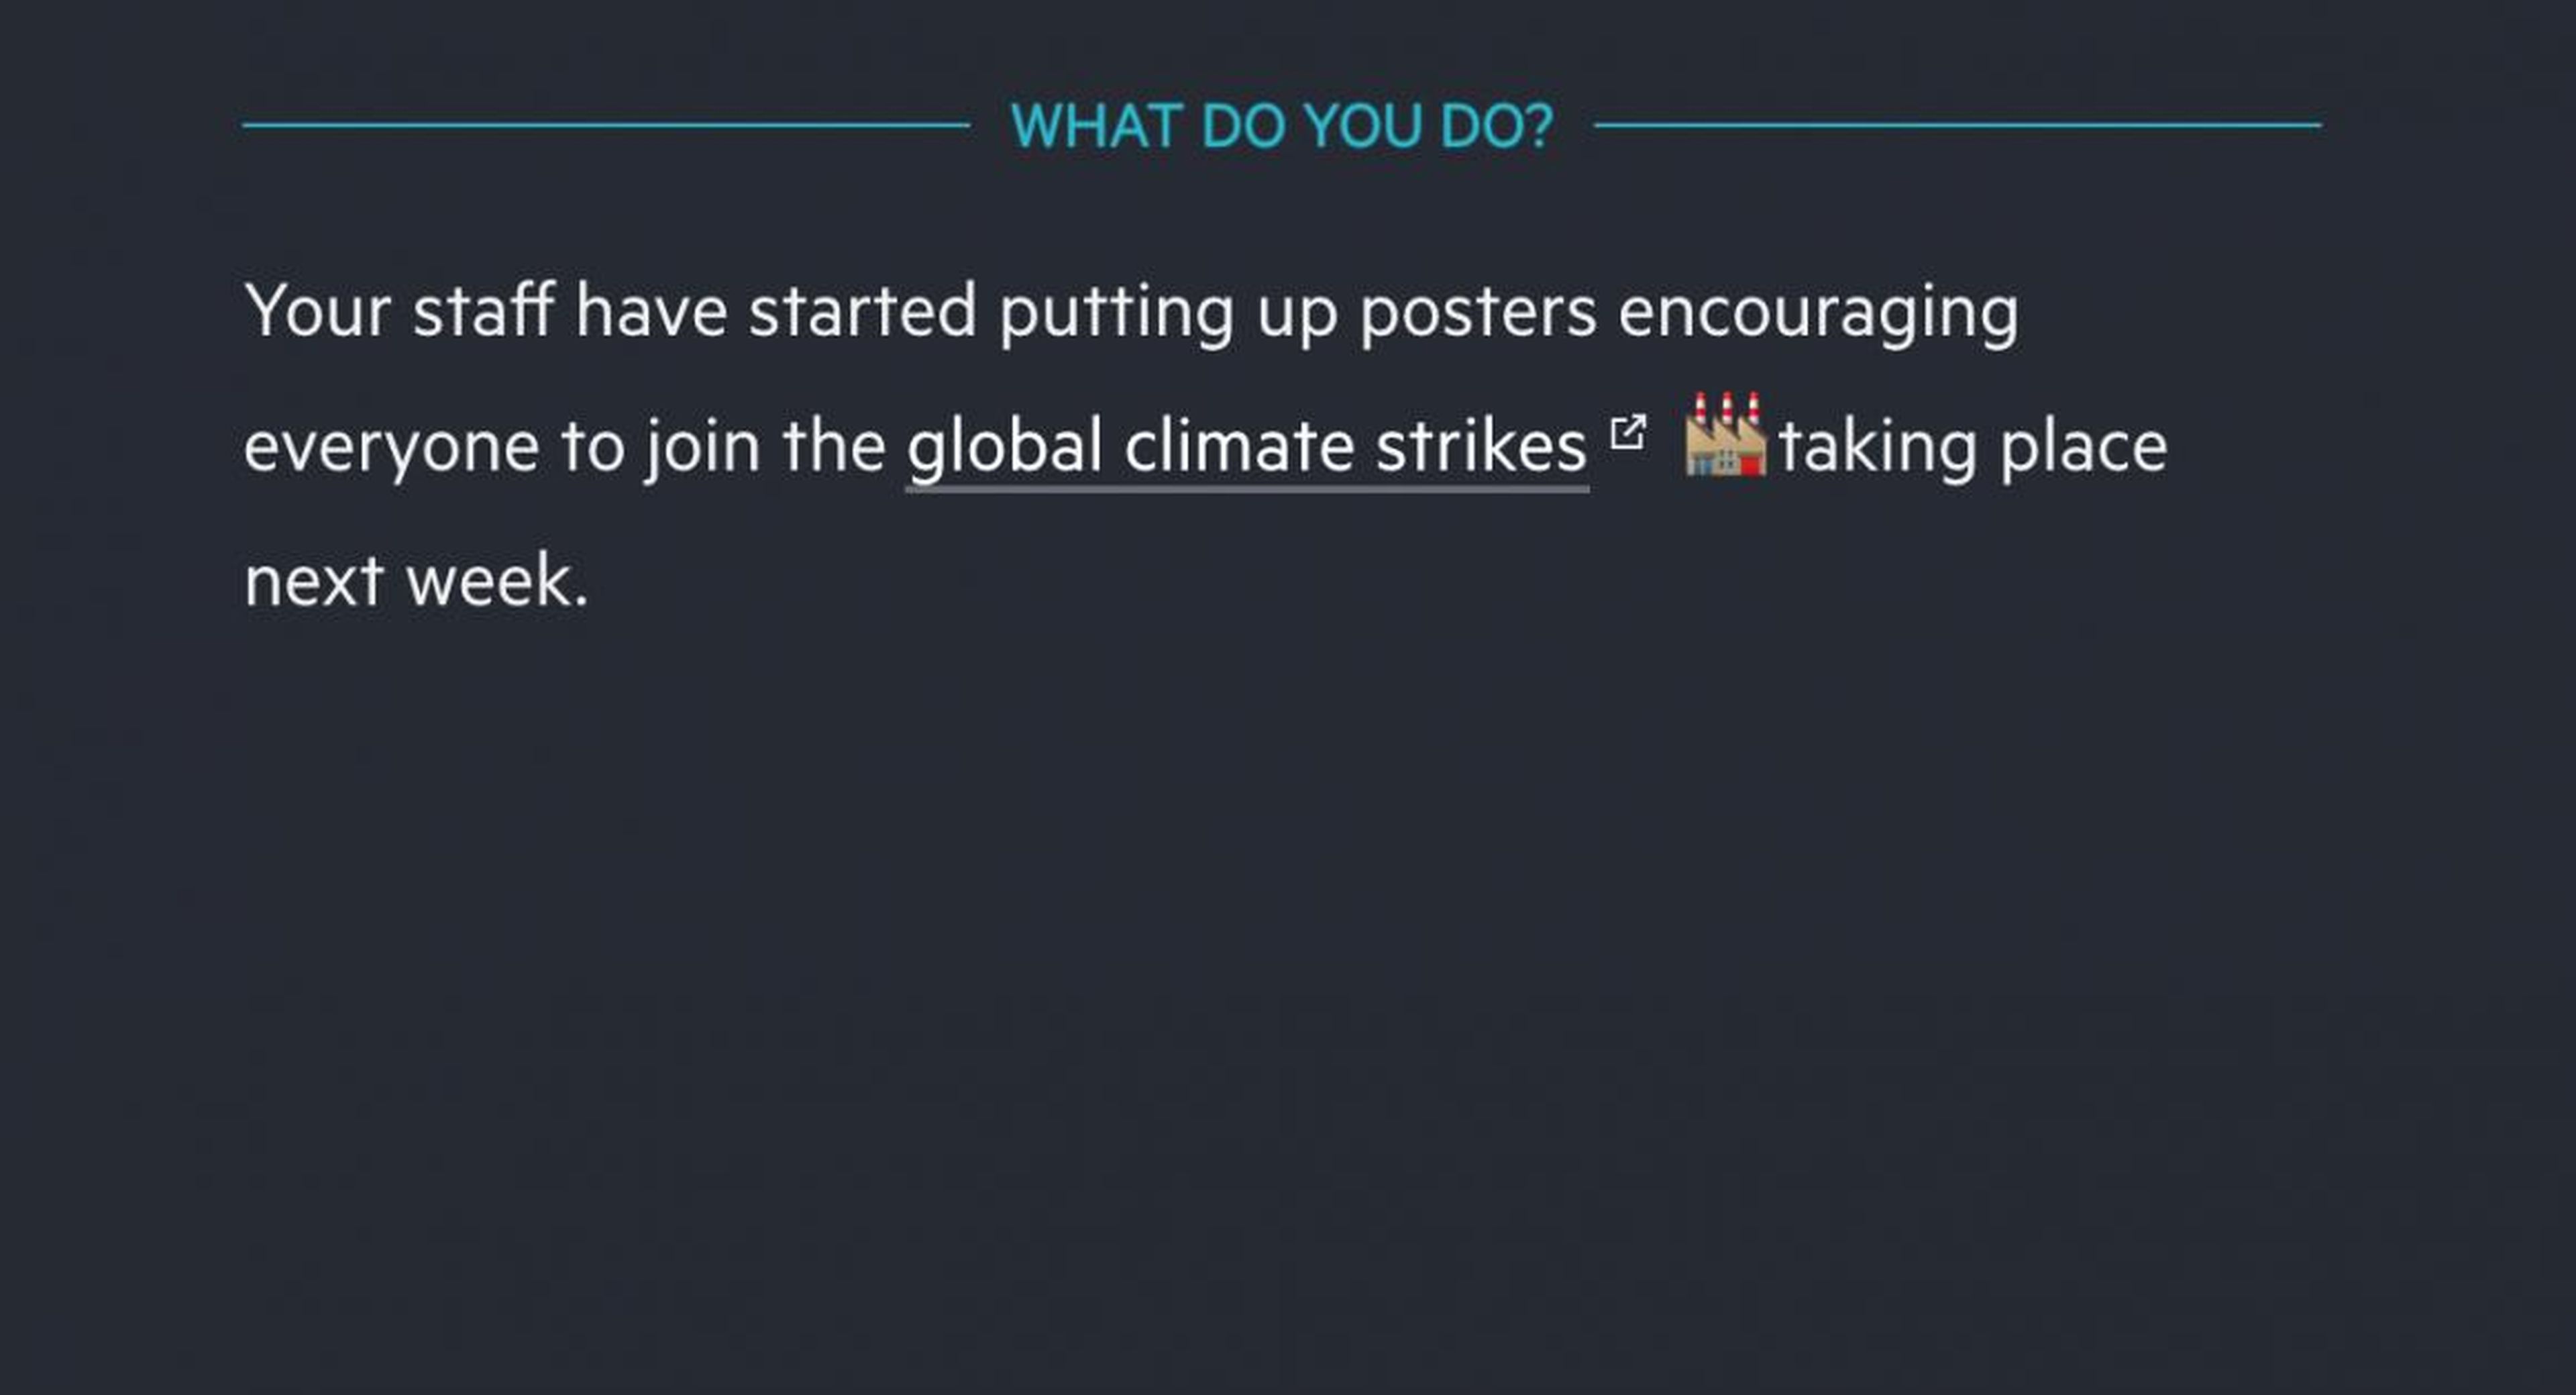 I didn't put many resources toward environmental responsibility, but I can at least let my employees join the global climate strike.